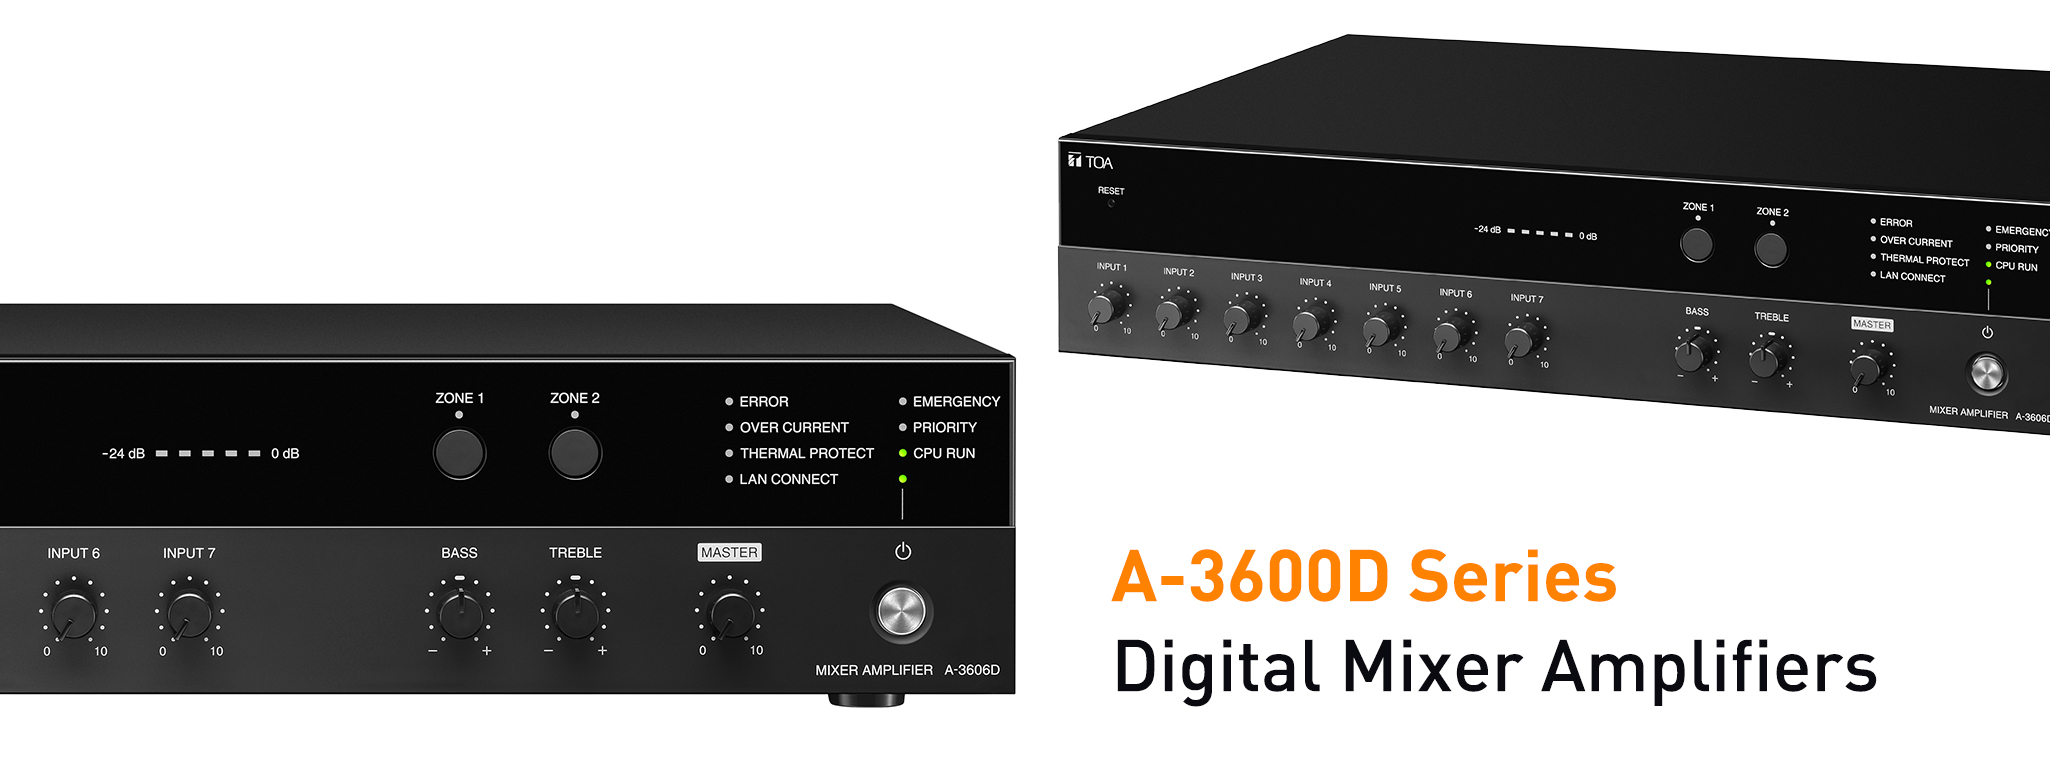 A-3600D Launched